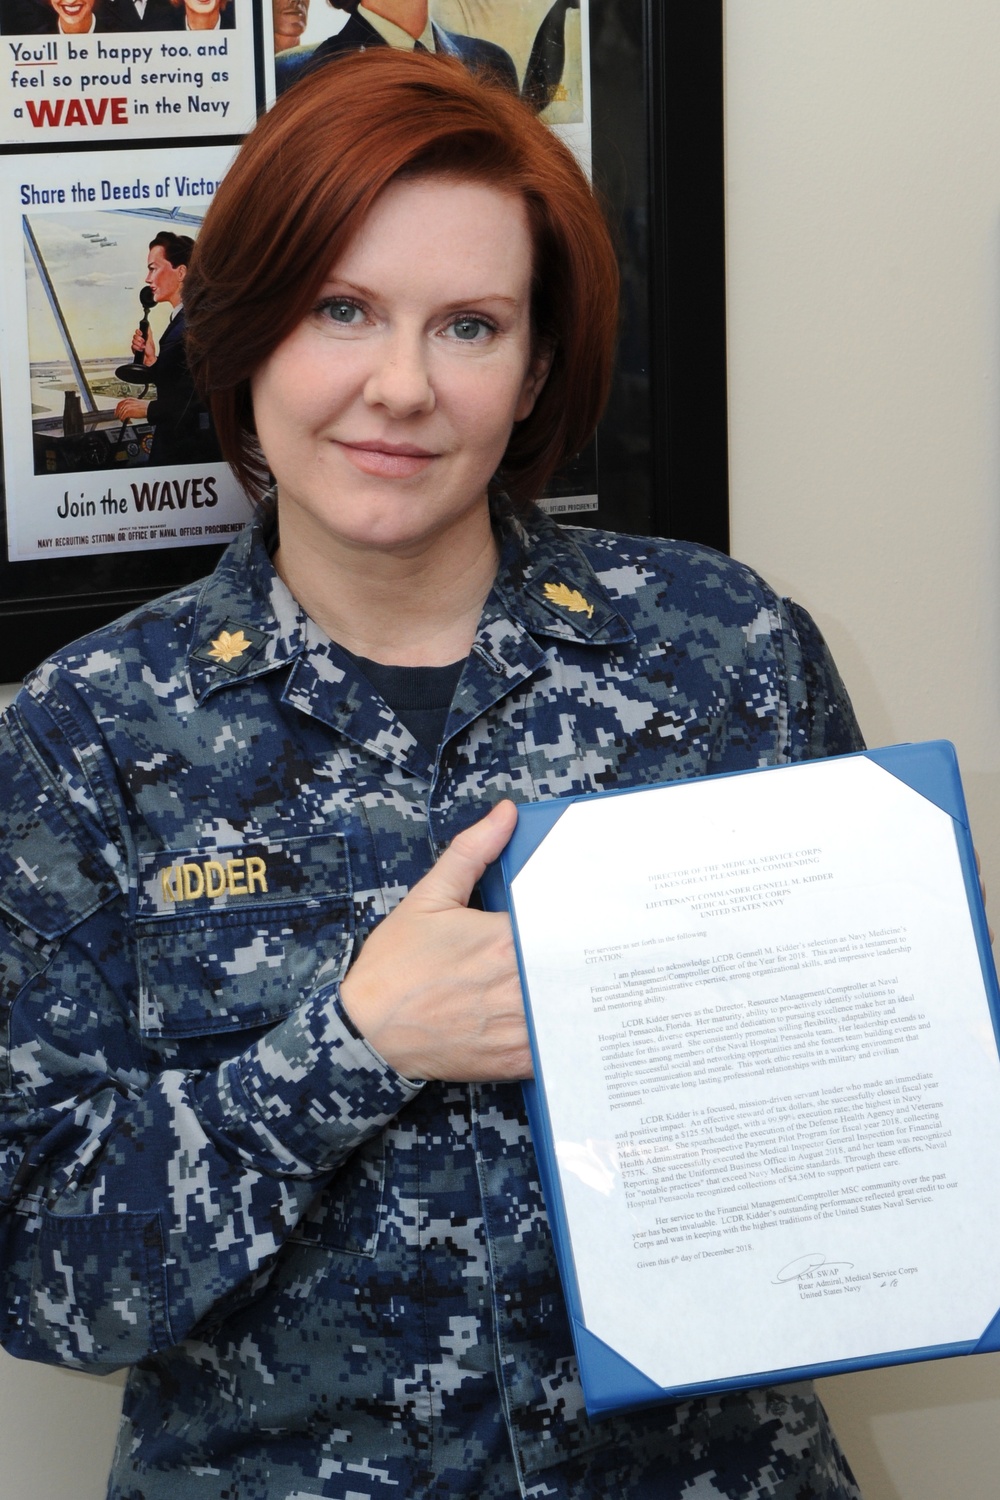 Navy Medicine Comptroller of the Year Always Ready for a Challenge